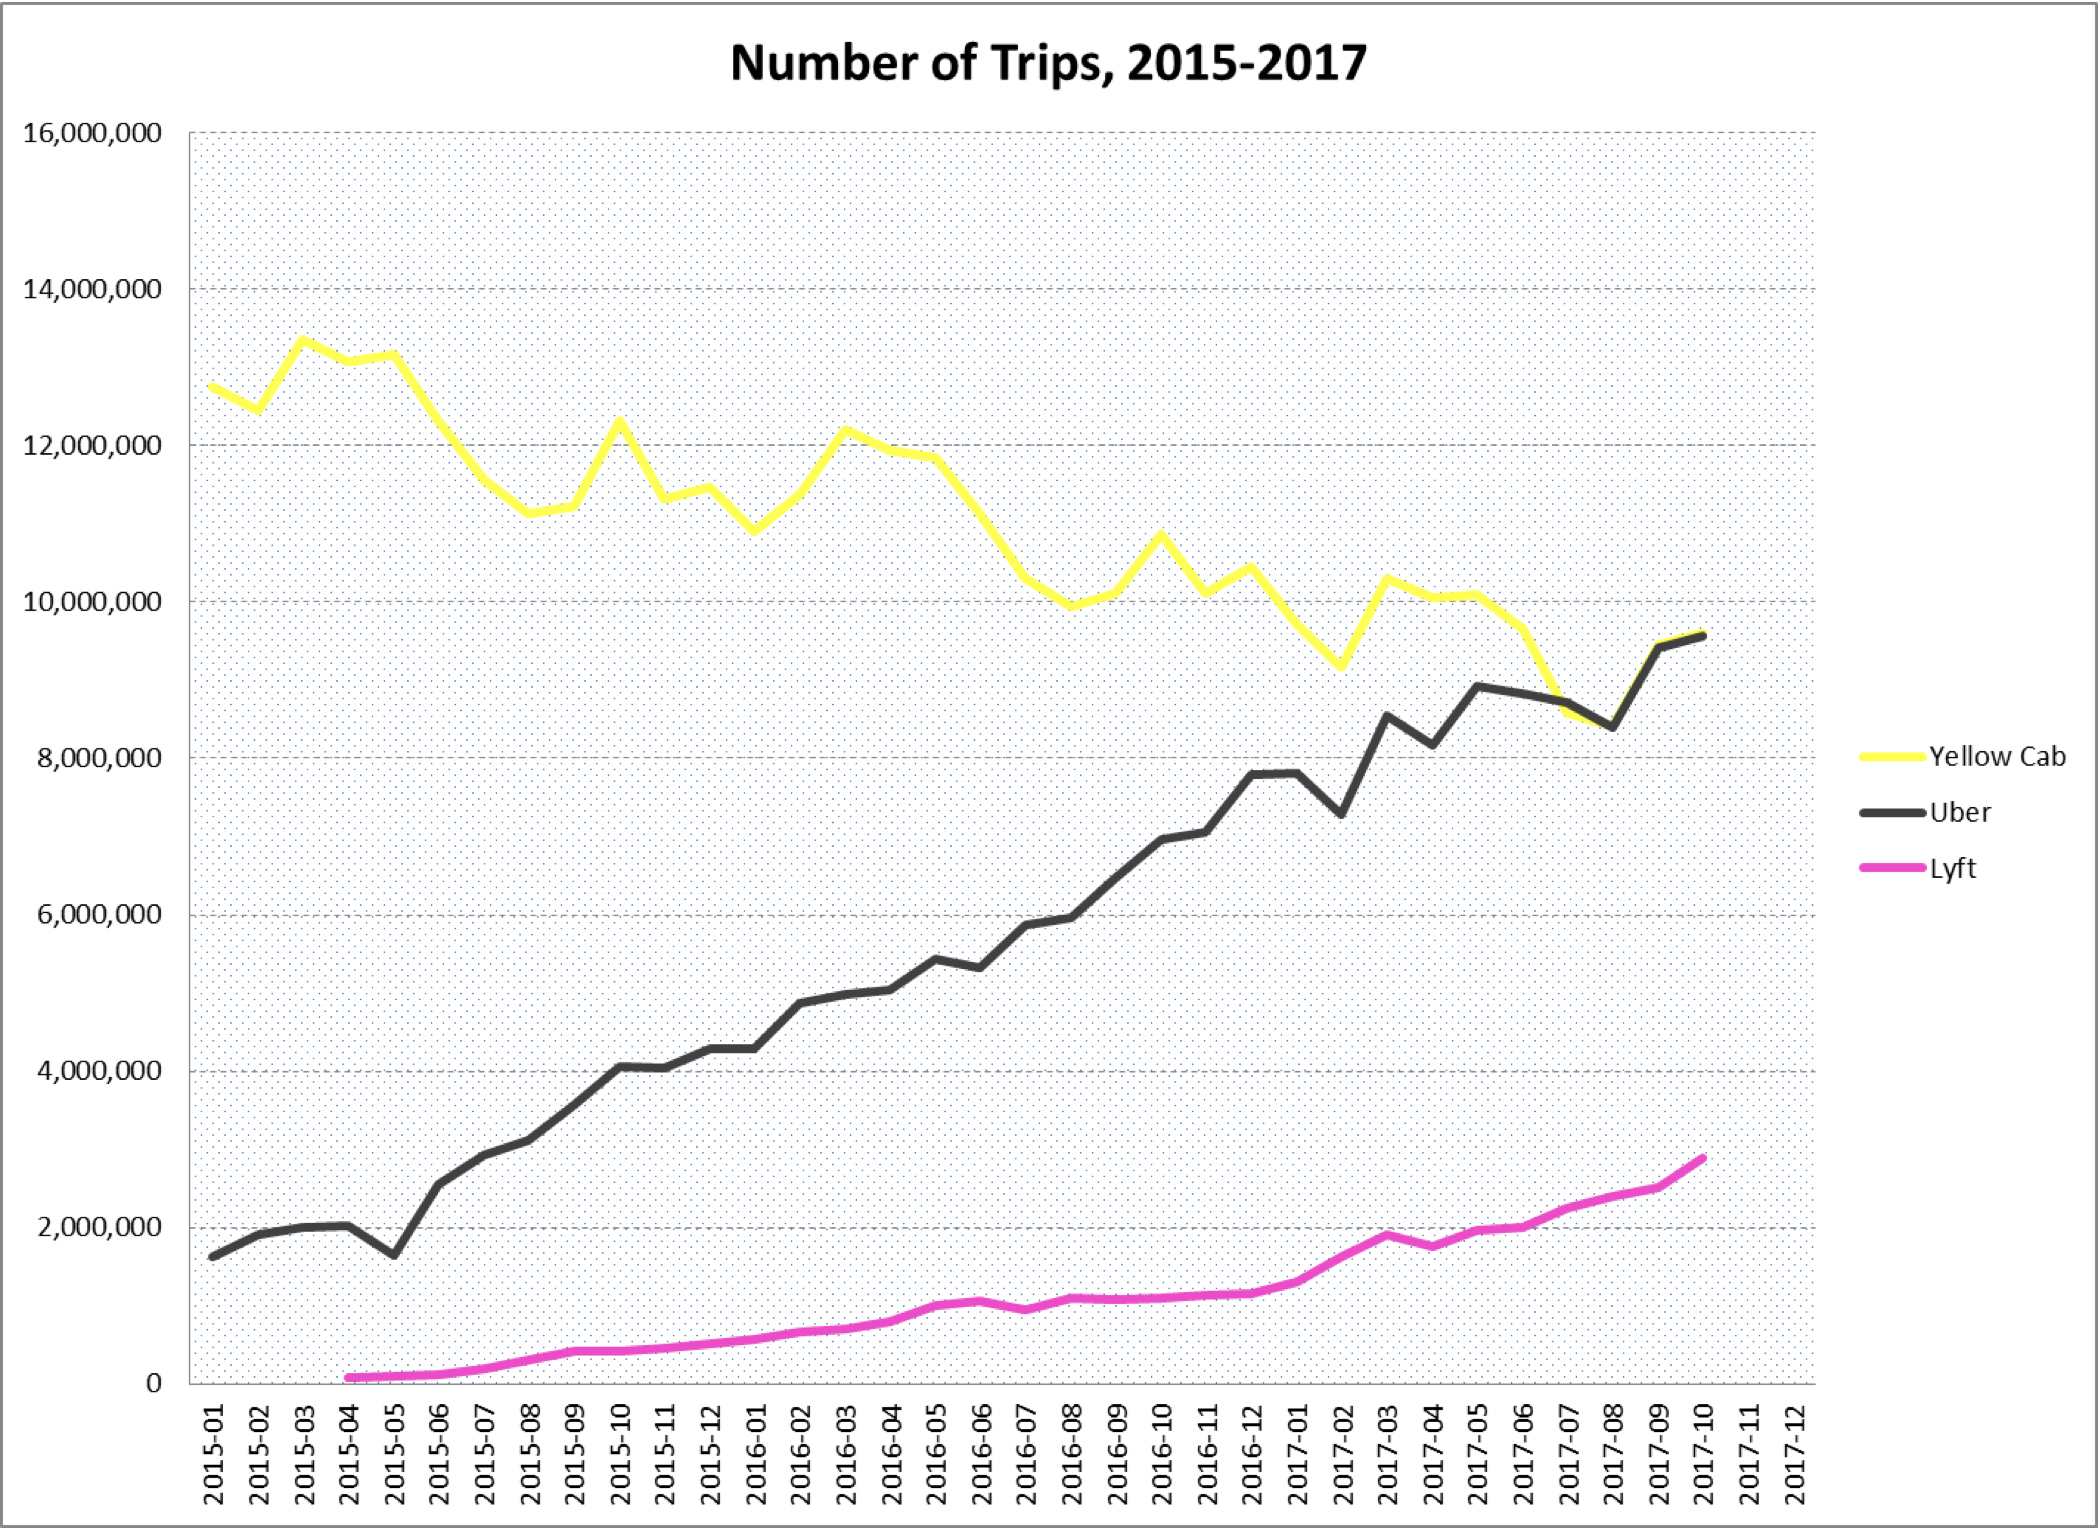 Figure 2-Number of monthly trips, 2015-2017